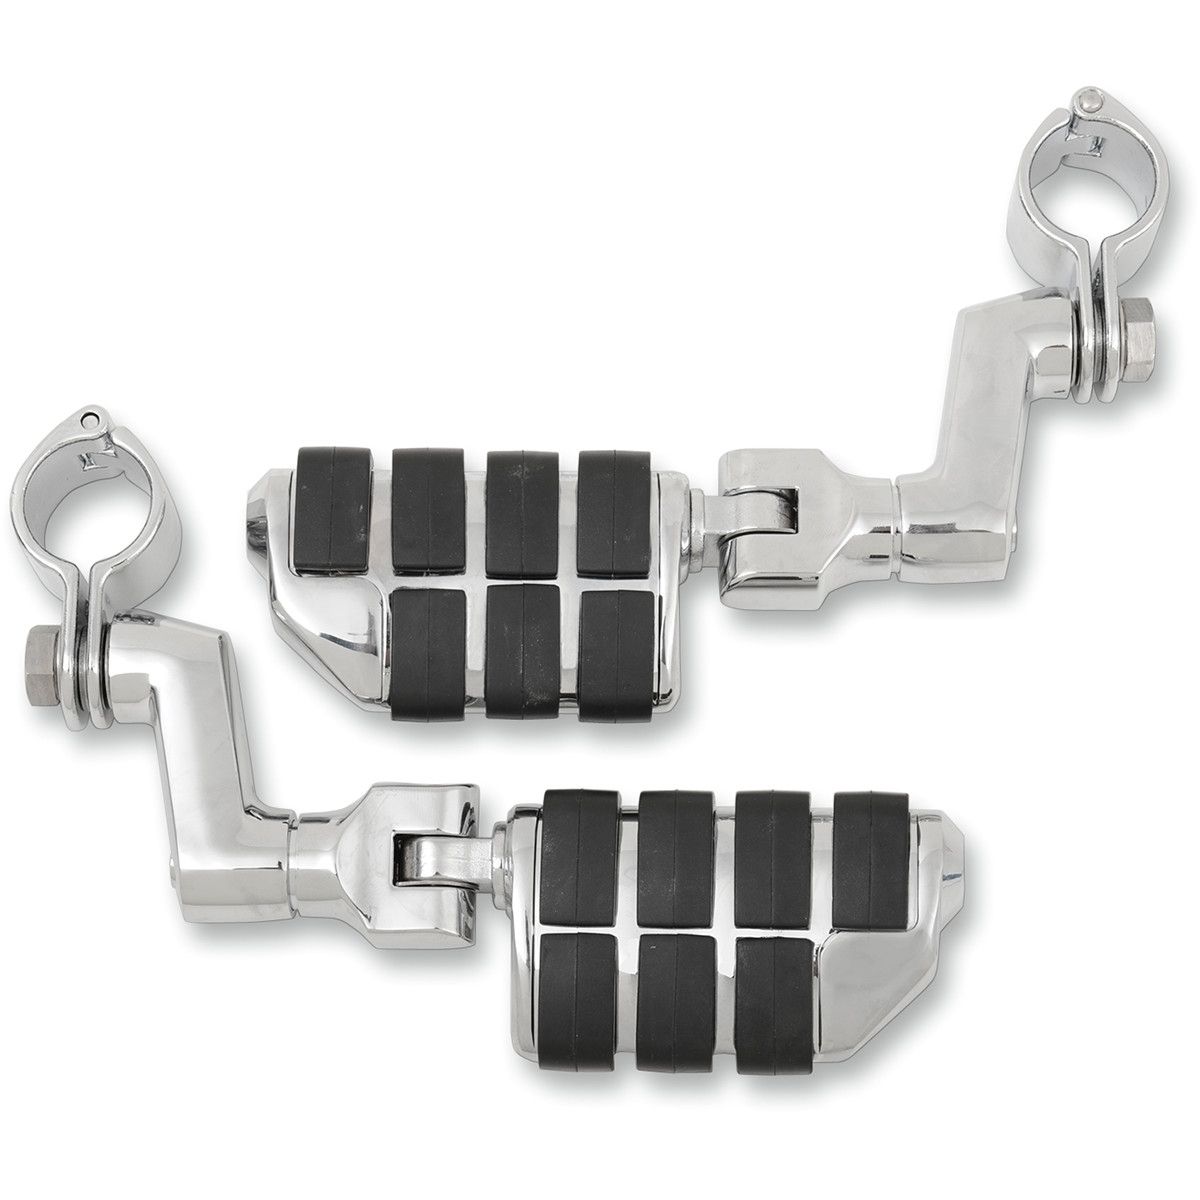 KURYAKYN 7993 DUALLY ISO PEGS WITH OFFSET & 1-1/4' MAGNUM QUICK CLAMPS